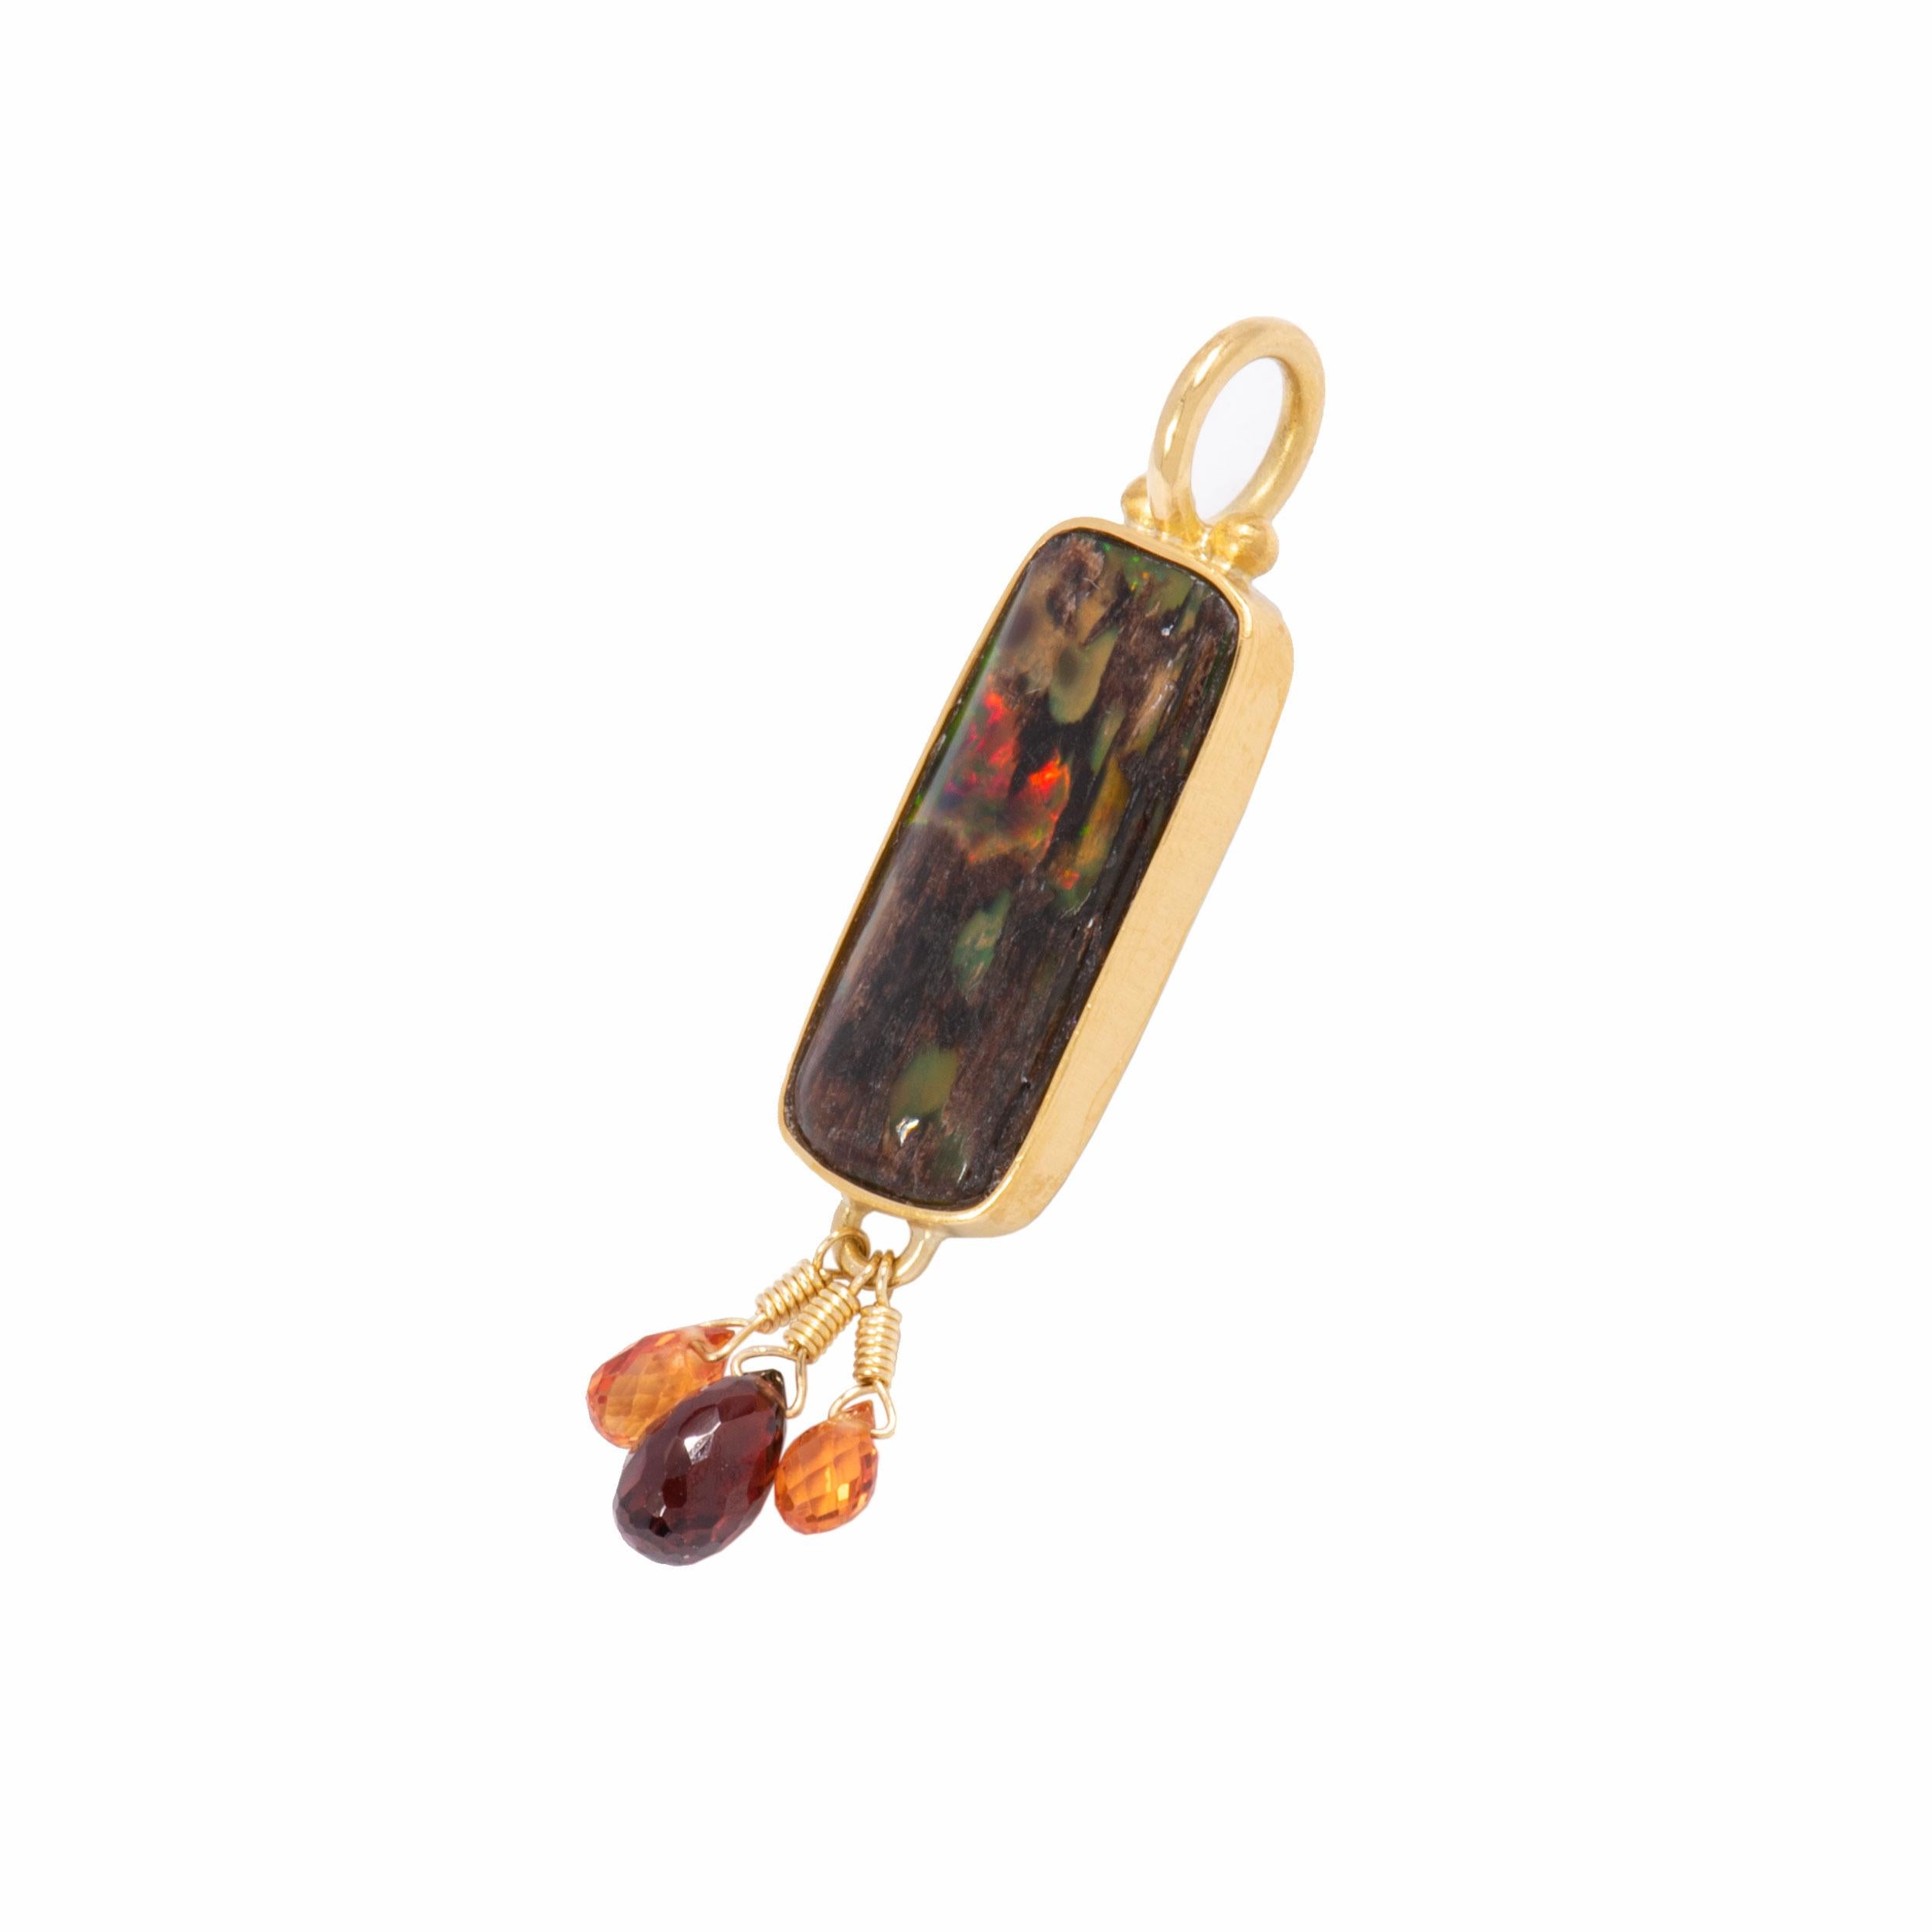 Women's Nevada Wood Opal Pendant with Garnet and Sapphire Briolettes in 22k and 18k Gold For Sale